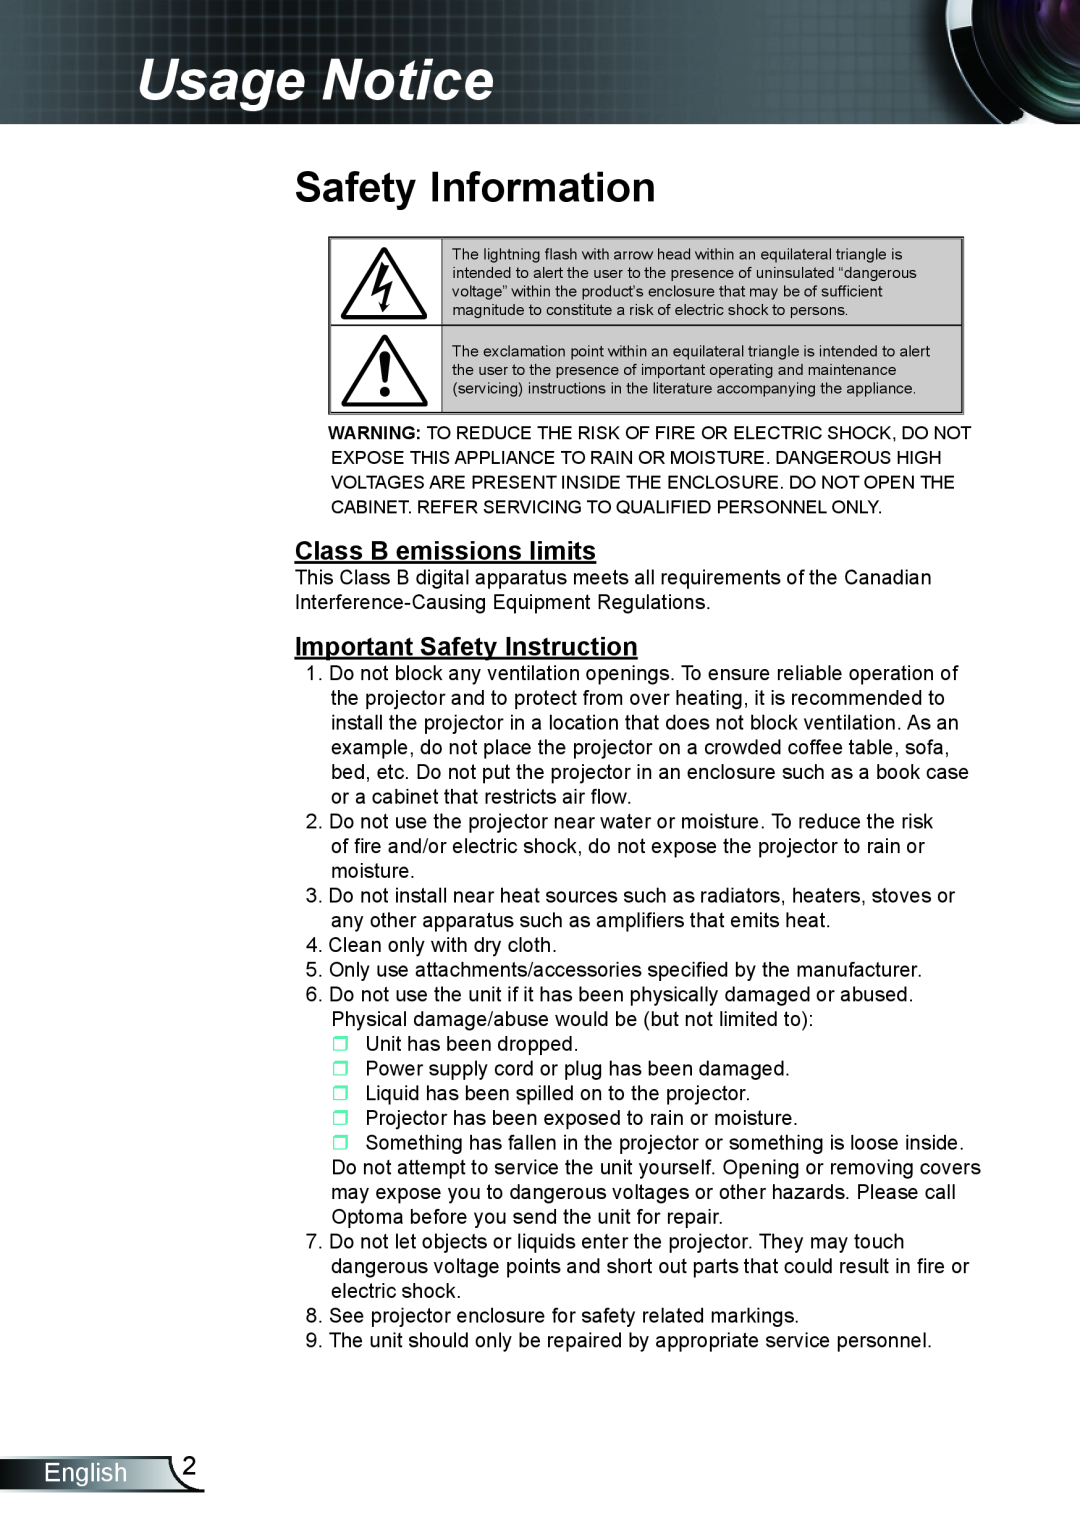 Optoma Technology TX5423D, TX762 Usage Notice, Safety Information, Class B emissions limits, Important Safety Instruction 